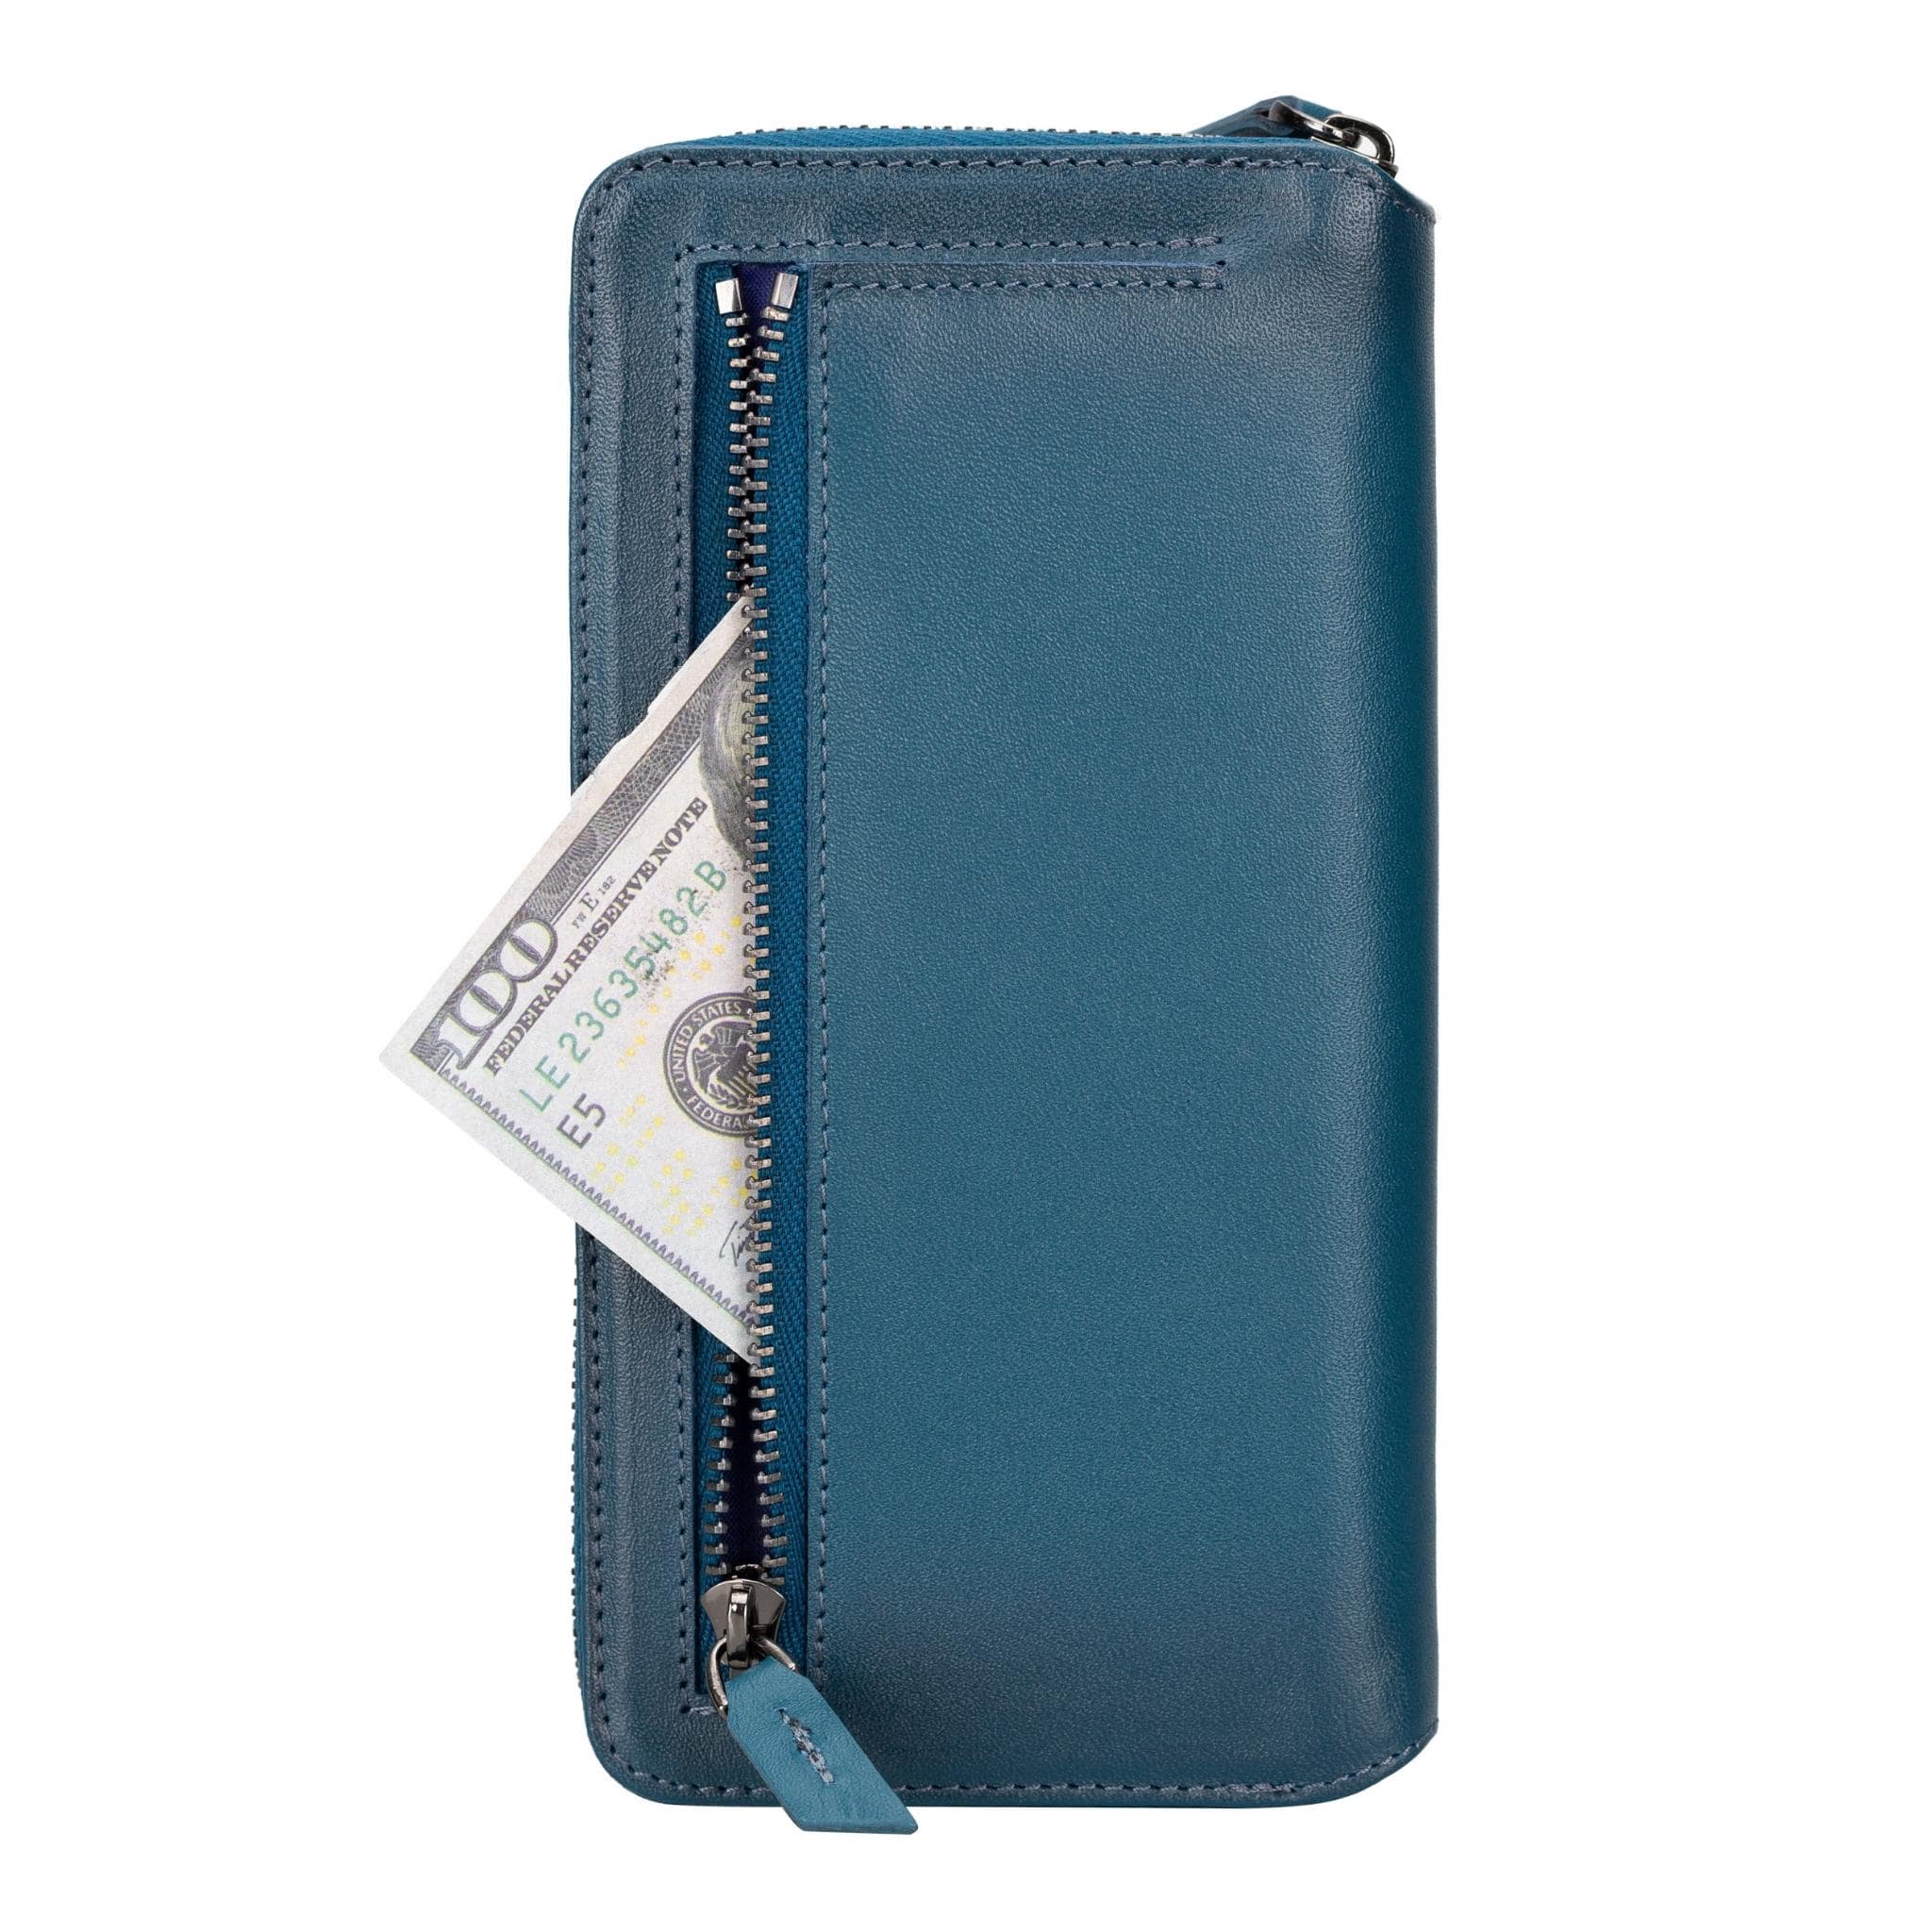  HoldingIT Leather Wallet Phone Case Compatible with